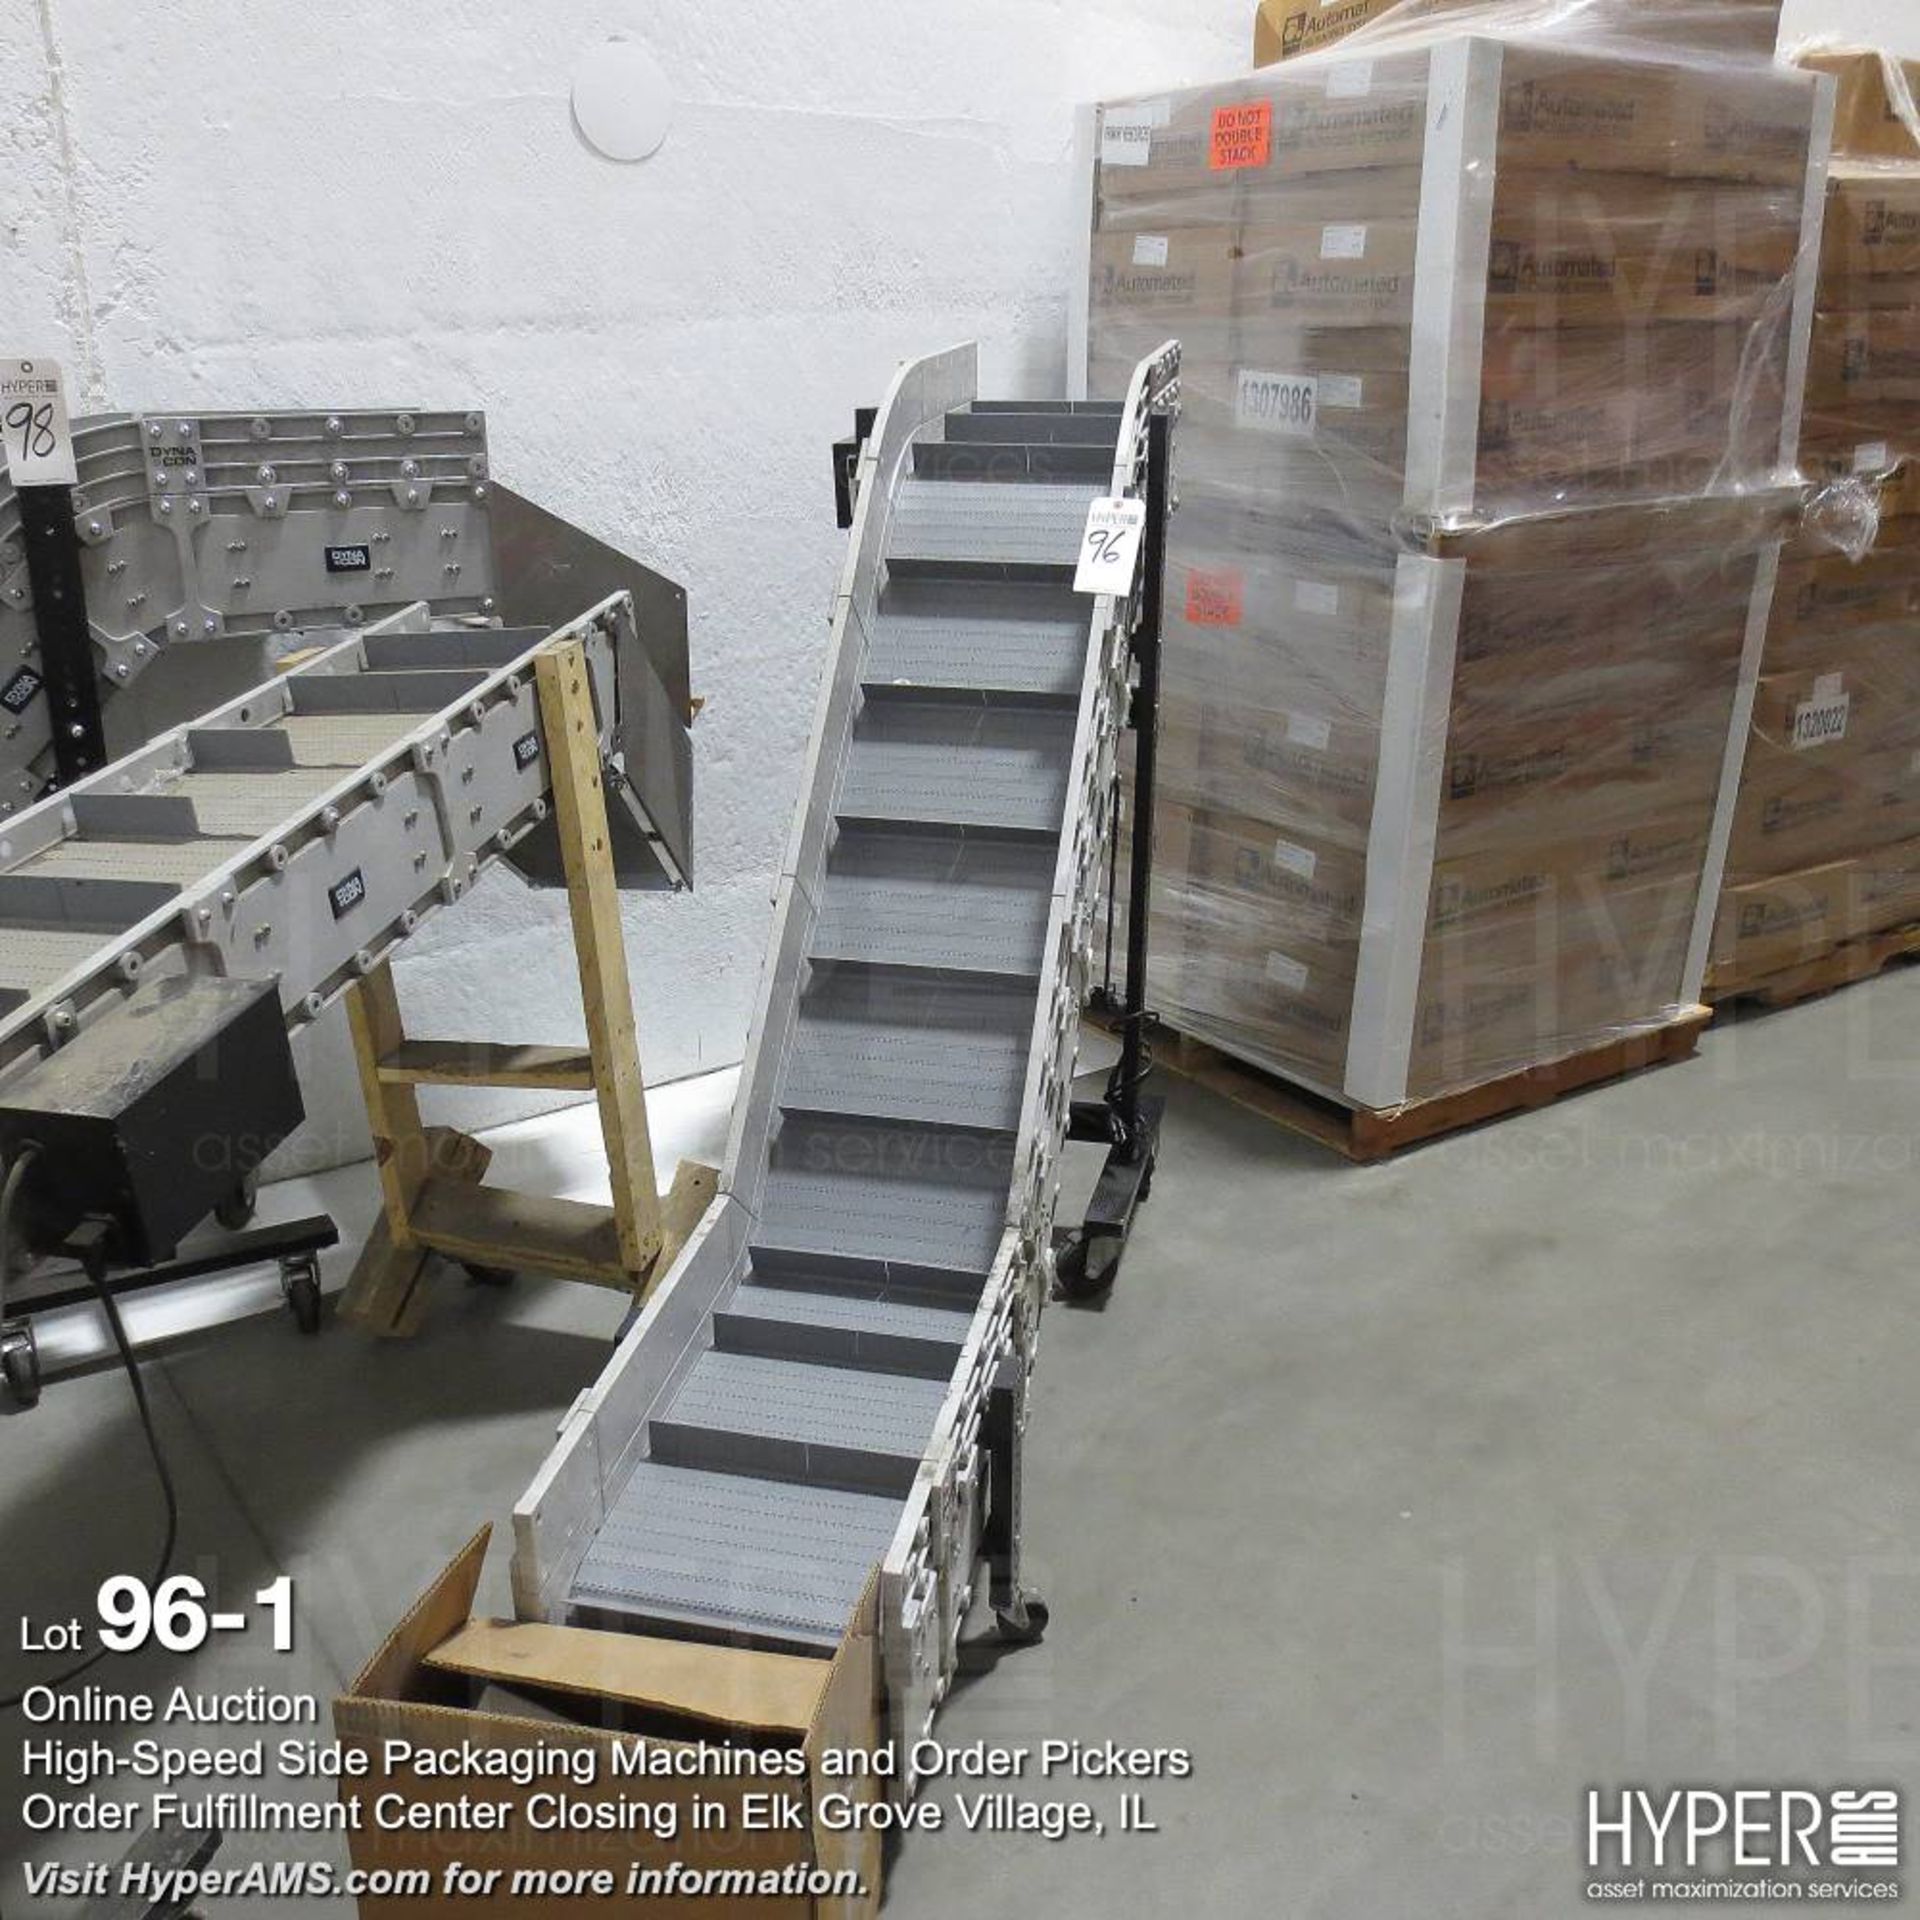 Dyna Con cleated, 14" elevated conveyor